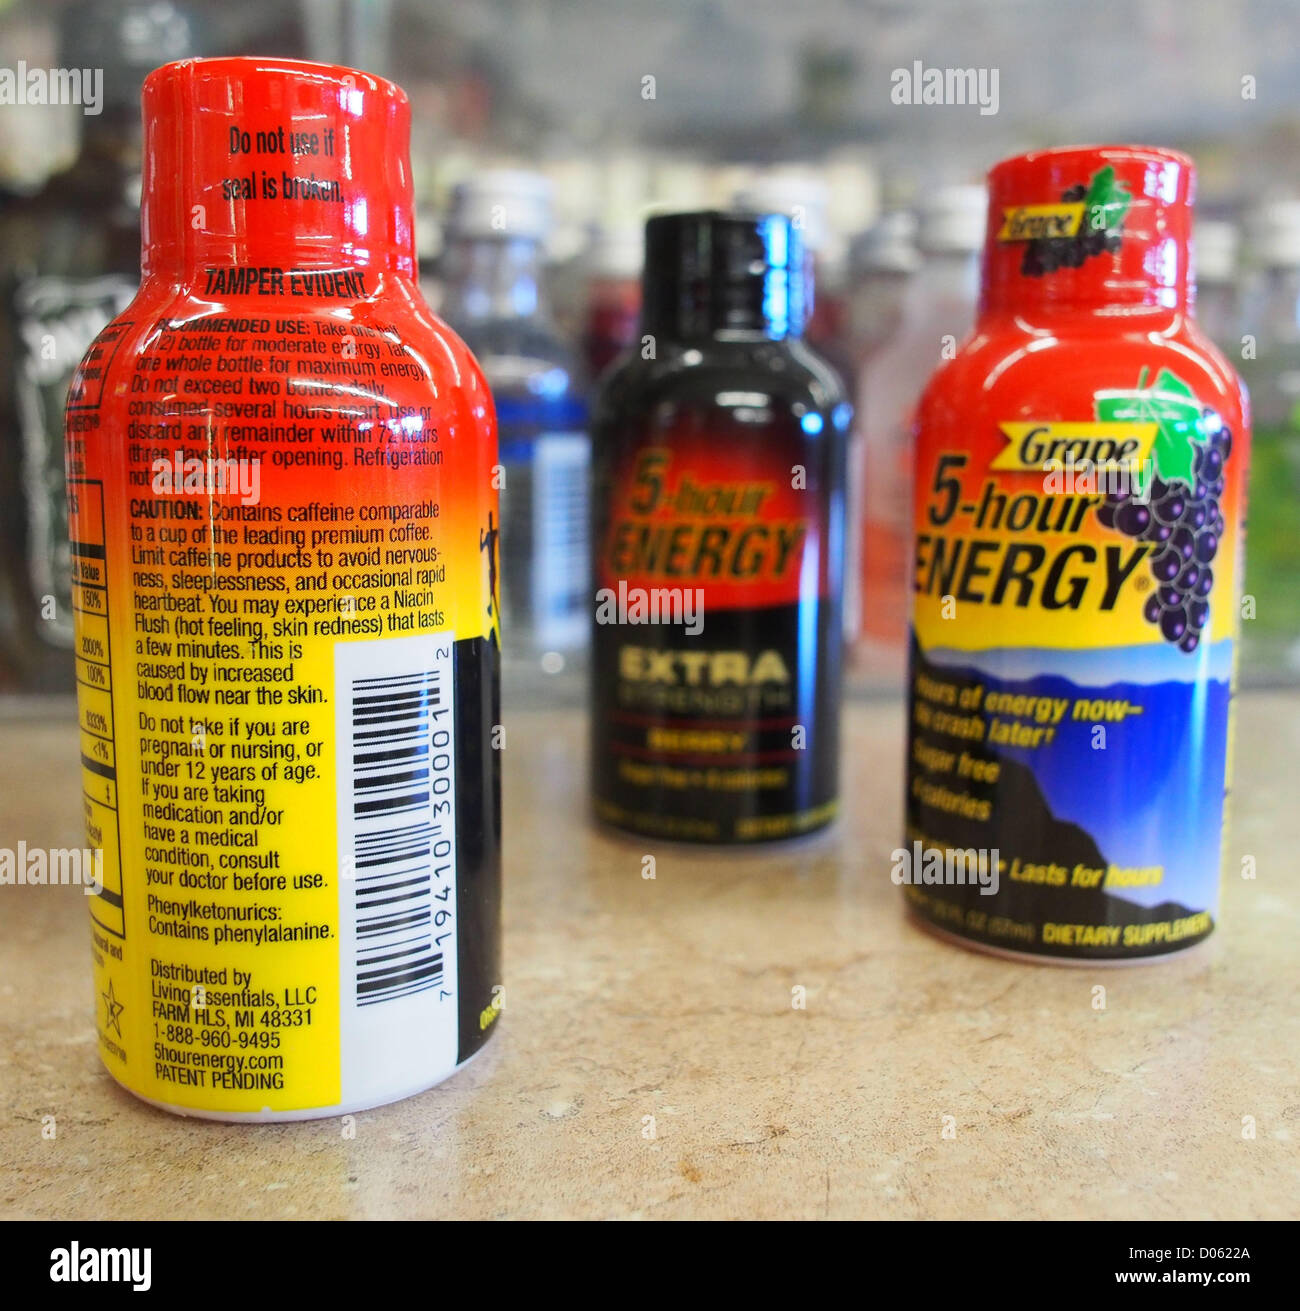 Jan. 1, 2012 - Orange County, California, USA - The label on the back of a 5-Hour Energy drink 1.93 ounce bottle cites the recommended use of the product along with caution information for the consumer.  5-Hour Energy drinks come in several flavors including orange, cherry and grape as well as a berry flavor in an extra strength mix.  News outlets, including ABC's Nightline, have reported that 13 deaths along with over 30 hospitalizations over the last 4 years in the United States can be attributed to the use of highly caffeinated energy drinks like 5-Hour Energy and Monster.  The drinks carry Stock Photo